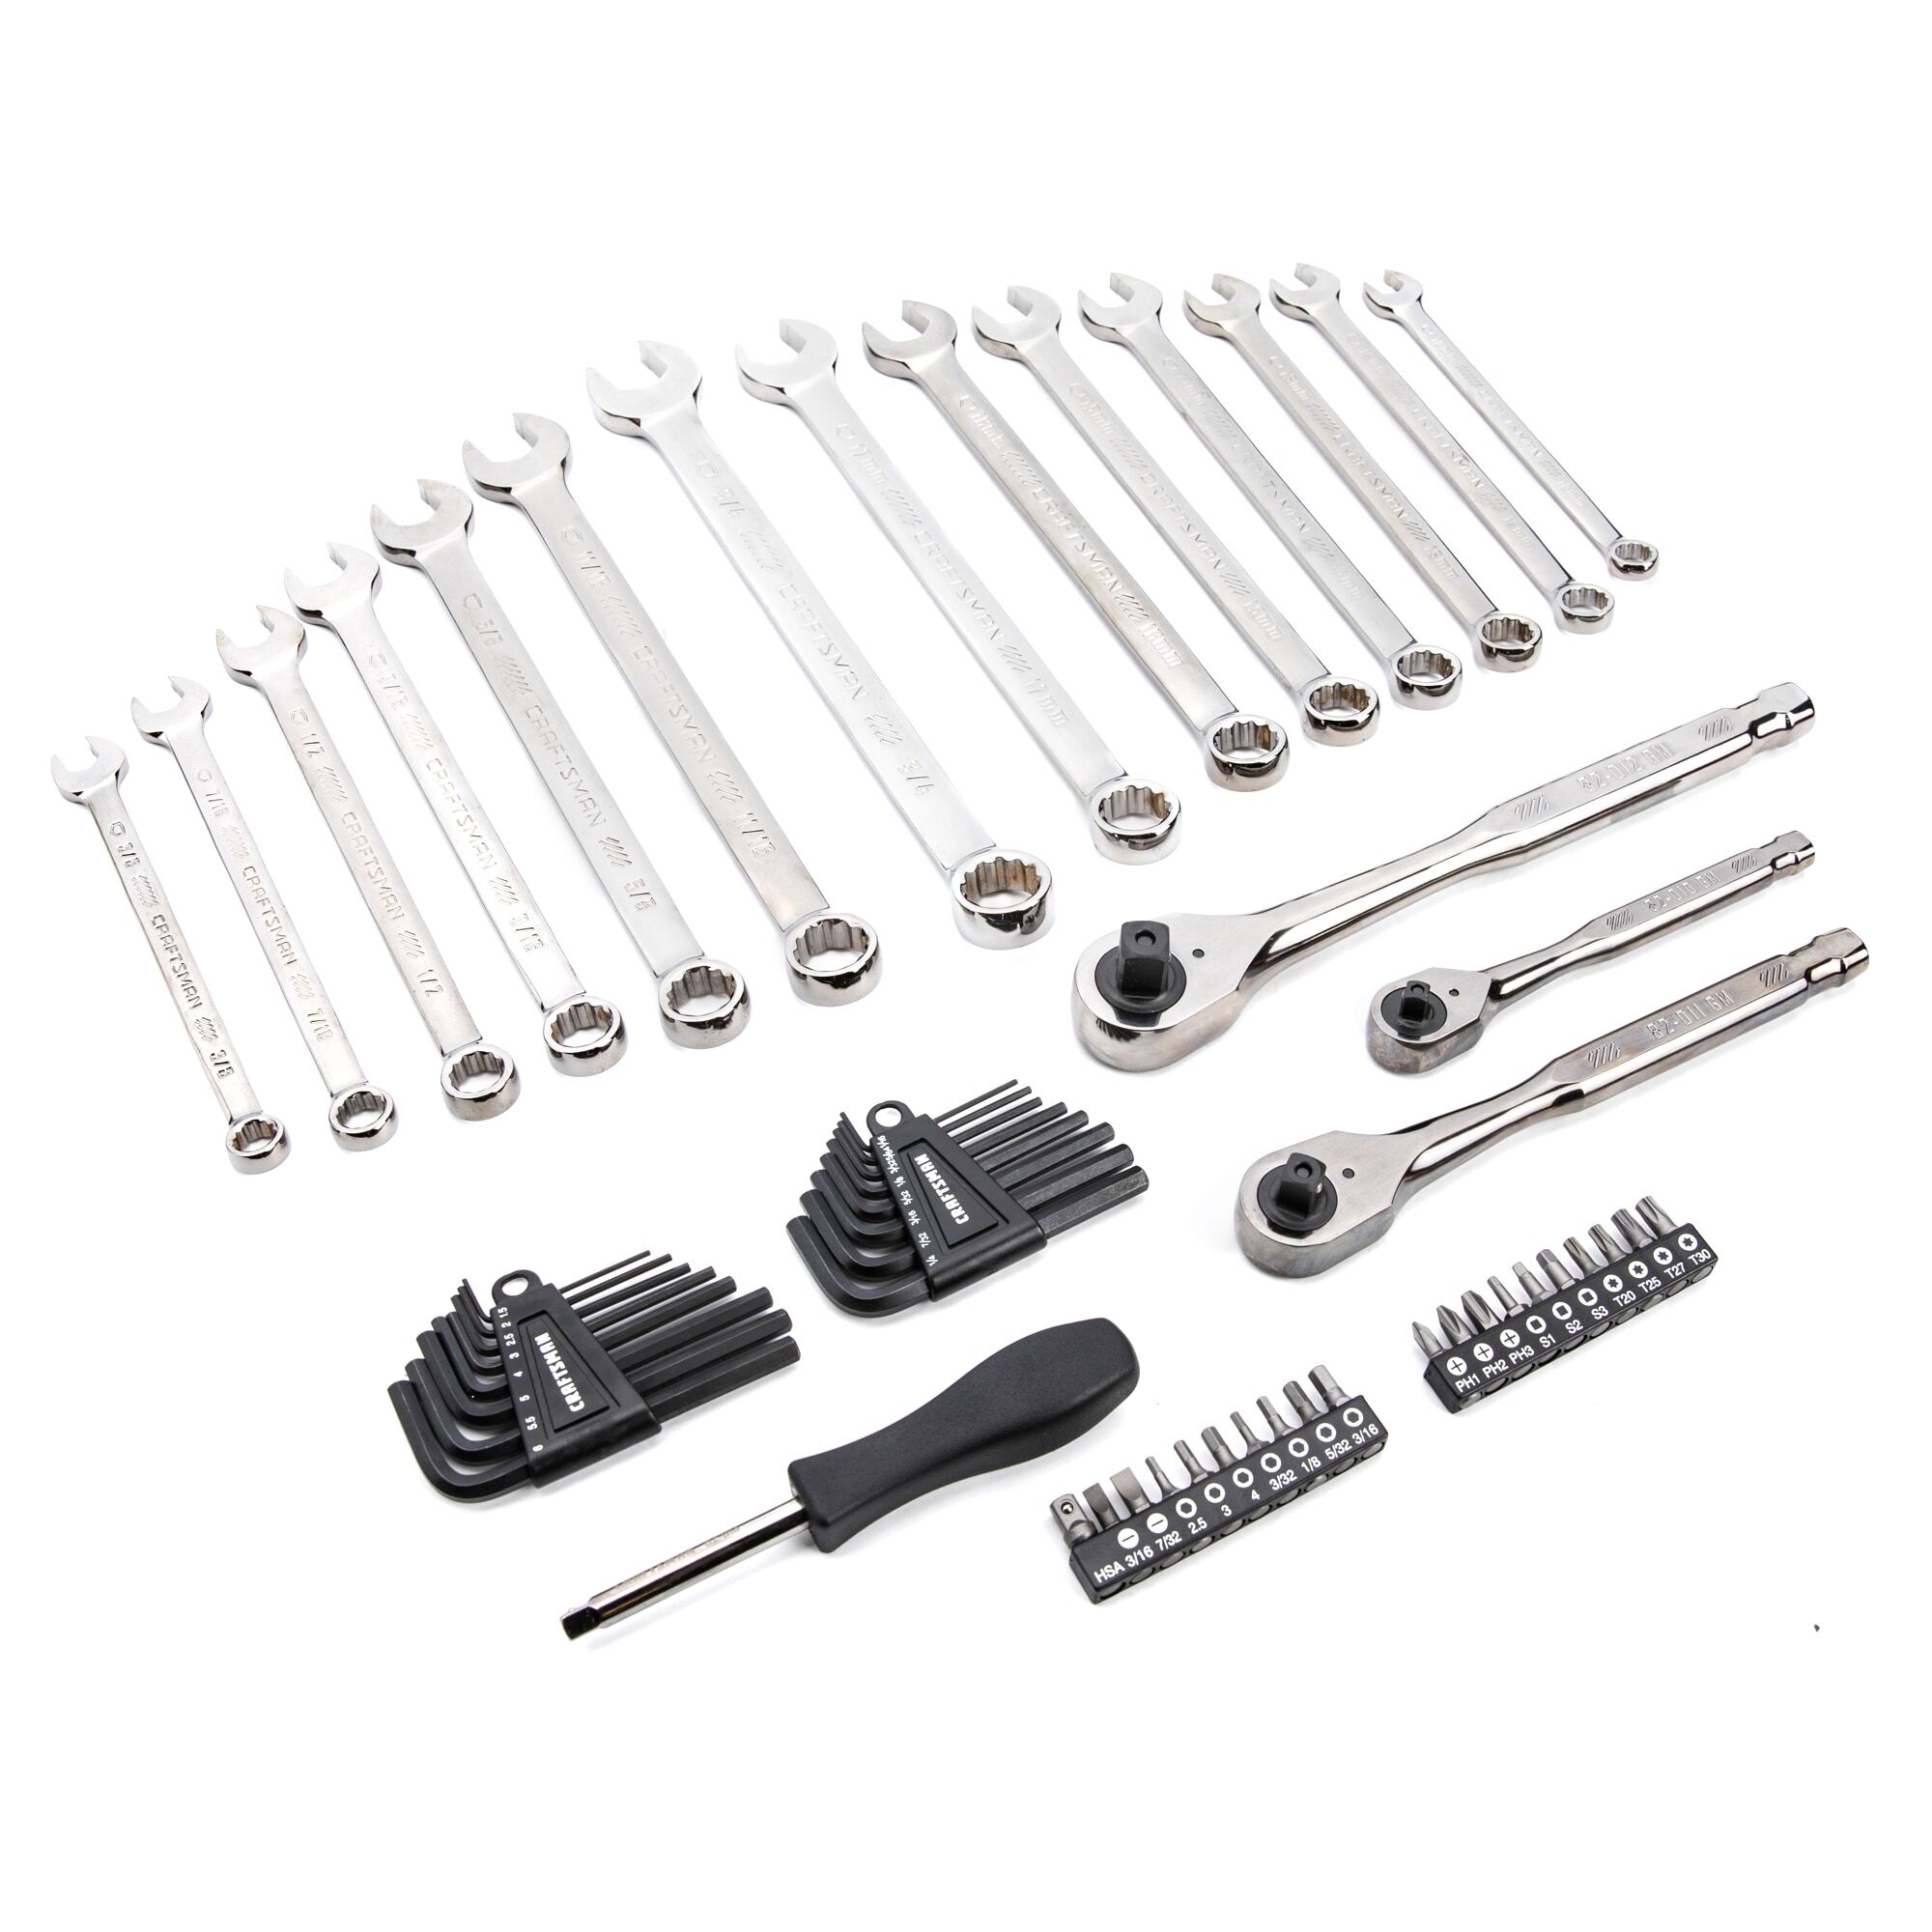 View of CRAFTSMAN Mechanics Tool Set family of products